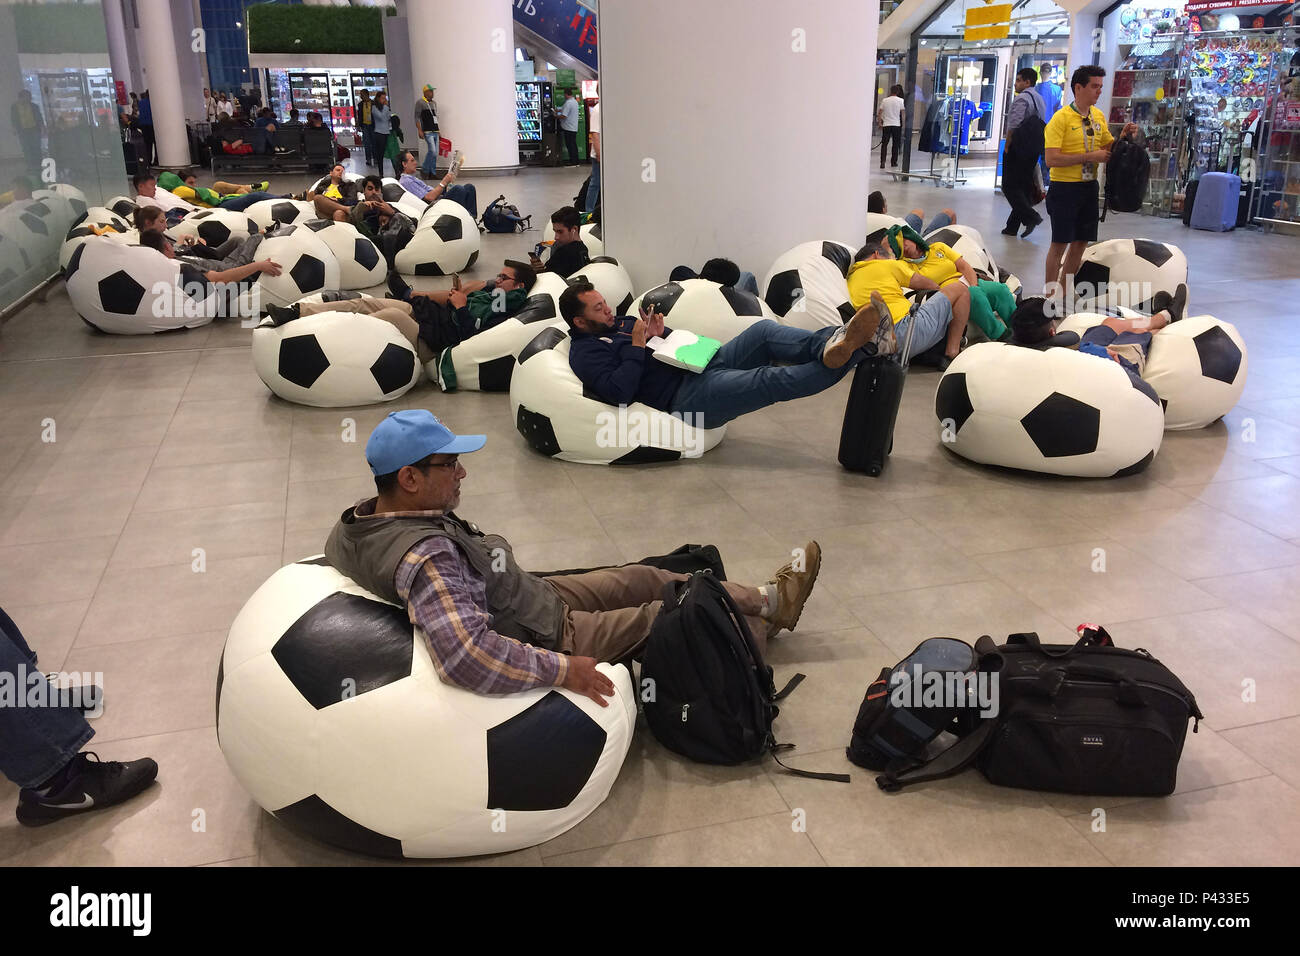 generally, peripheral subject. Overwhelmed football fans rest on seats in the style of footballs. Sleep, rest, fans, football fans. Uruguay (Saudi Arabia (KSA) 1-0, preliminary round, group A, match 18, on 20/06/2018 in Rostov-on-Don, Rostov Arena Football World Cup 2018 in Russia from 14.06 - 15.07.2018. | Usage worldwide Stock Photo